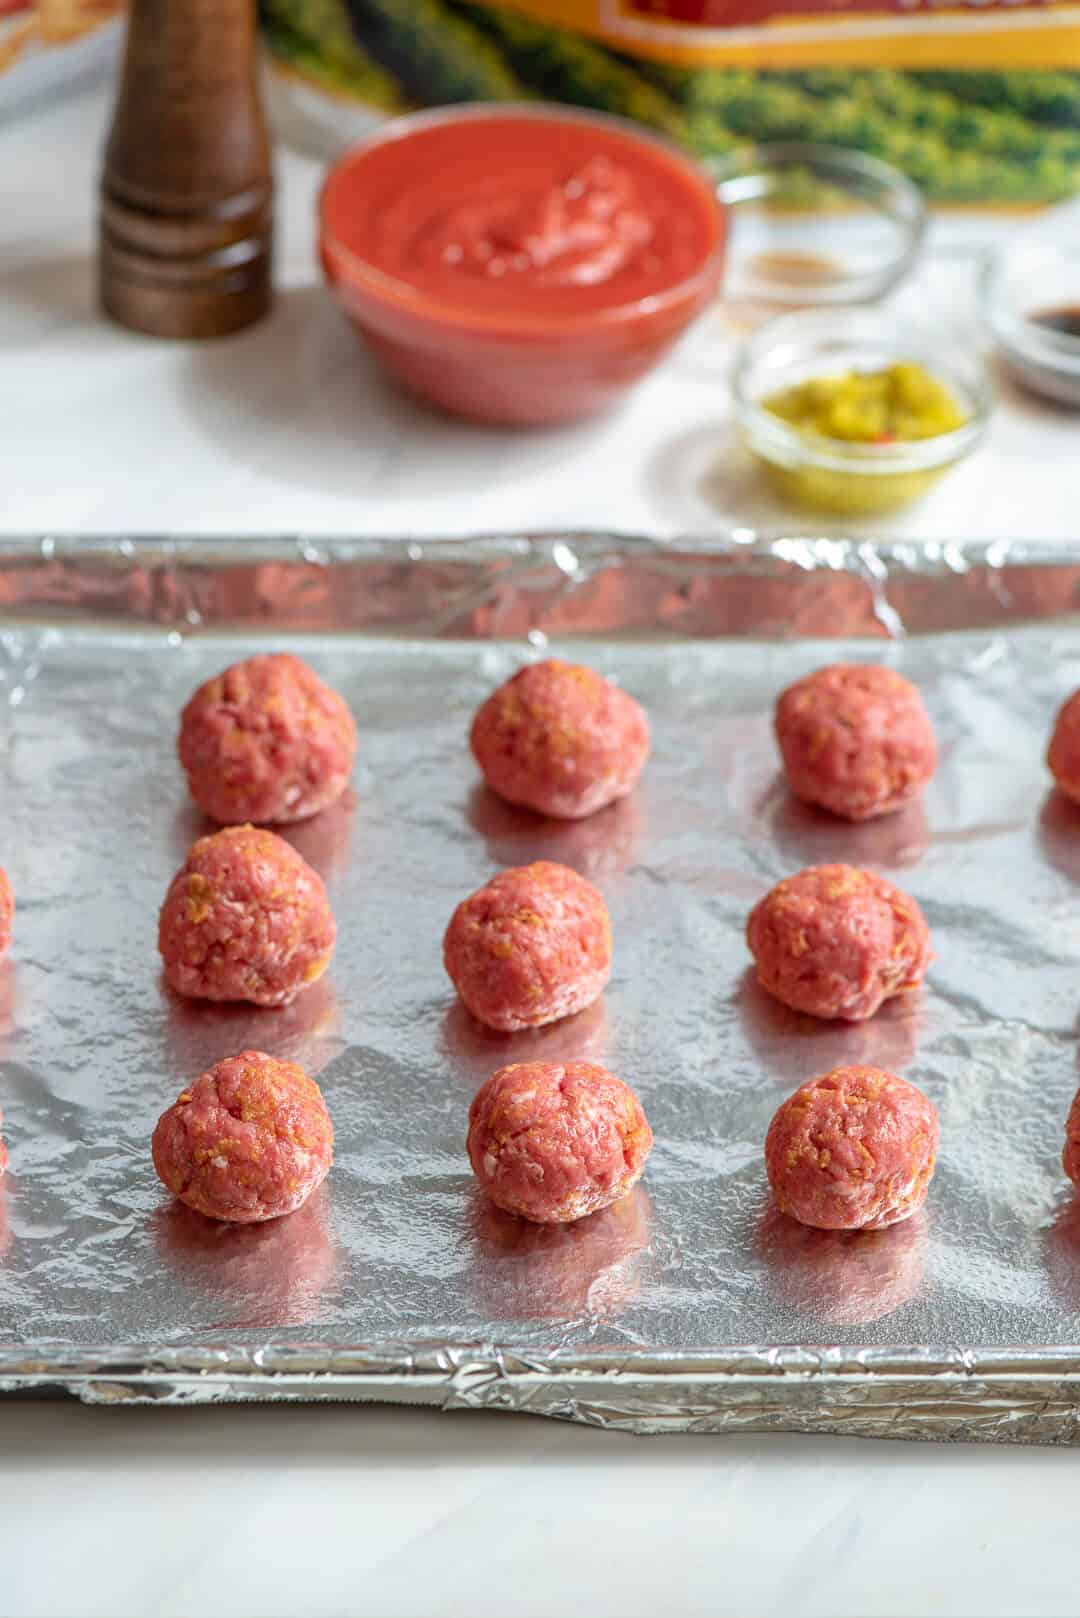 The meat mixture is formed into balls and placed on a foil lined baking sheet.